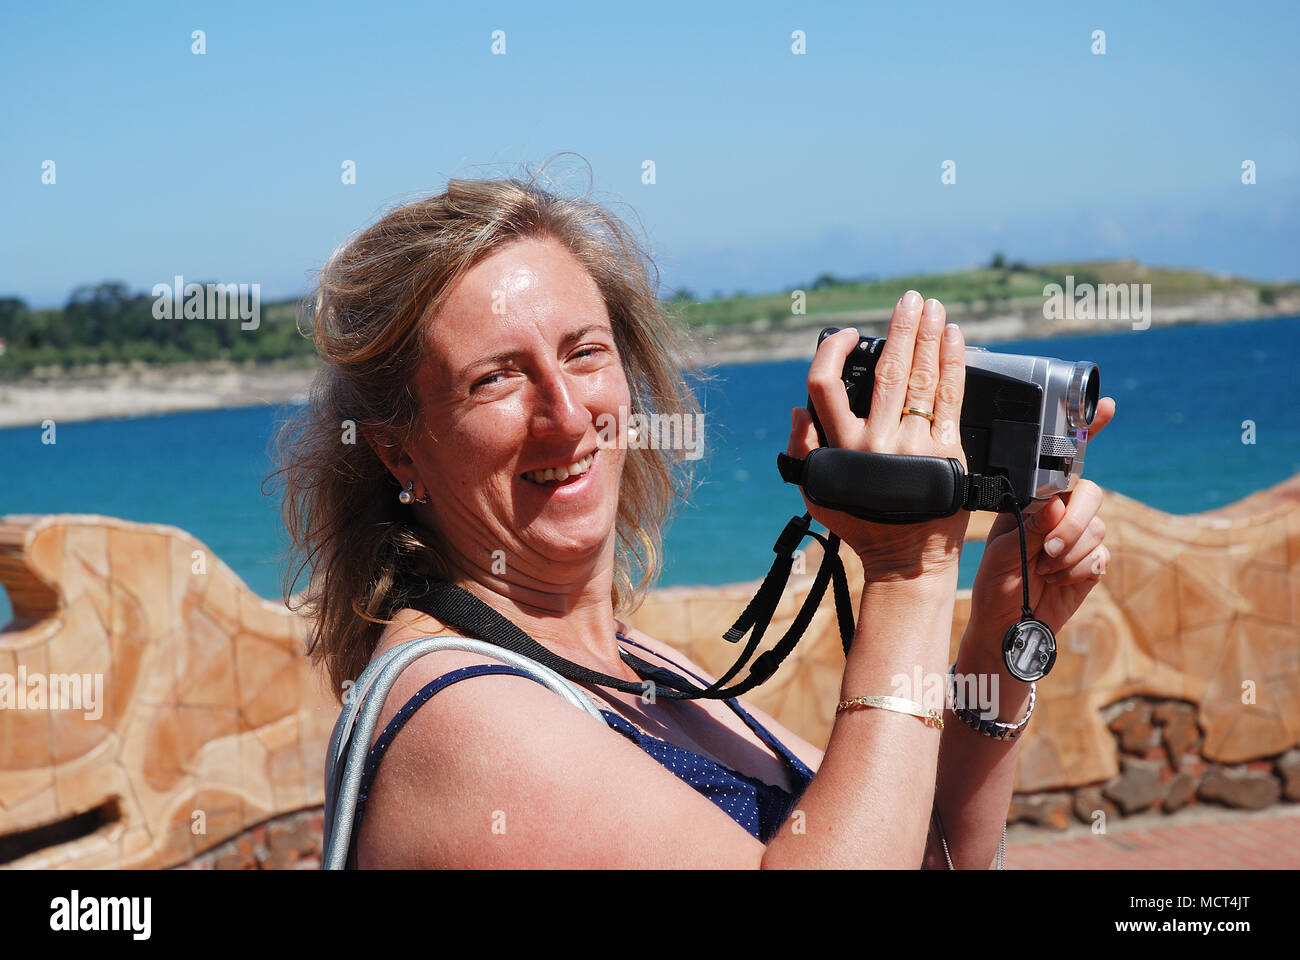 Mature woman with video camera, smiling and looking at the camera. Stock Photo